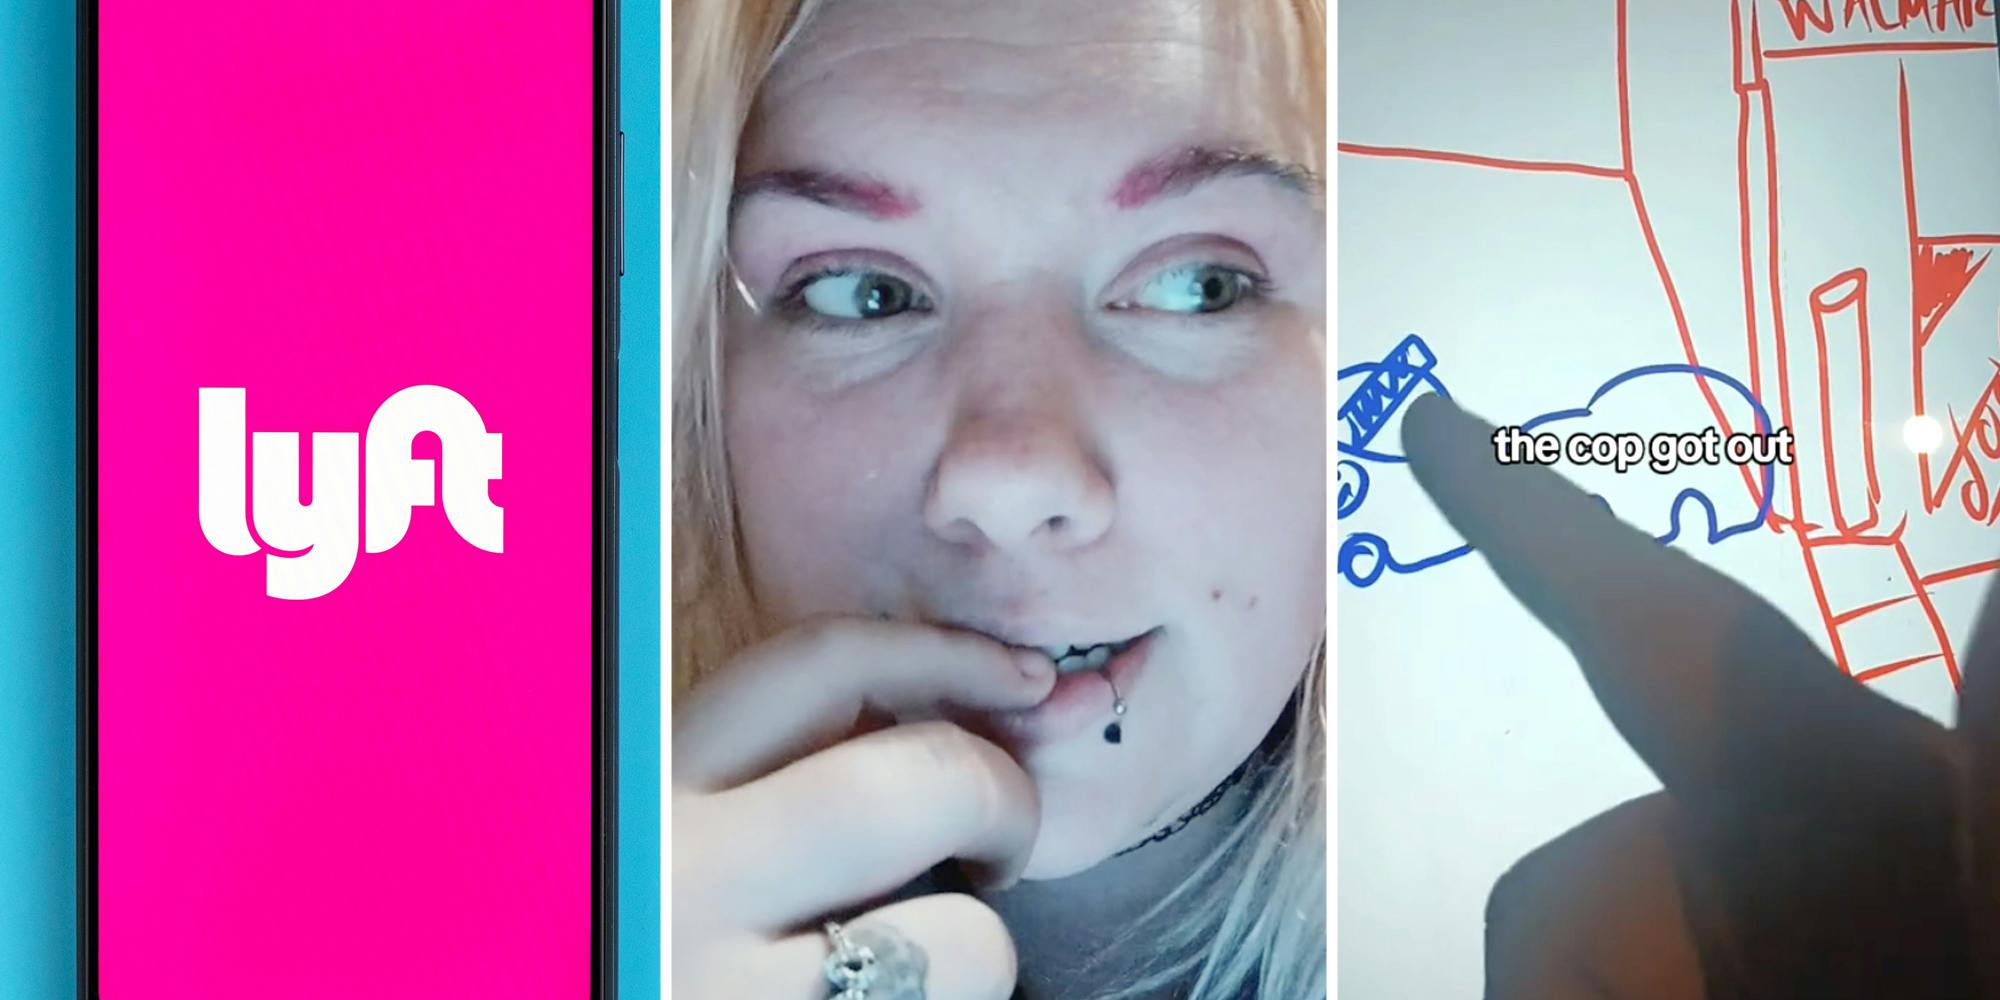 Lyft app on phone(l), Woman biting nail(c), Finger pointing to draw or scene unfolding(r)